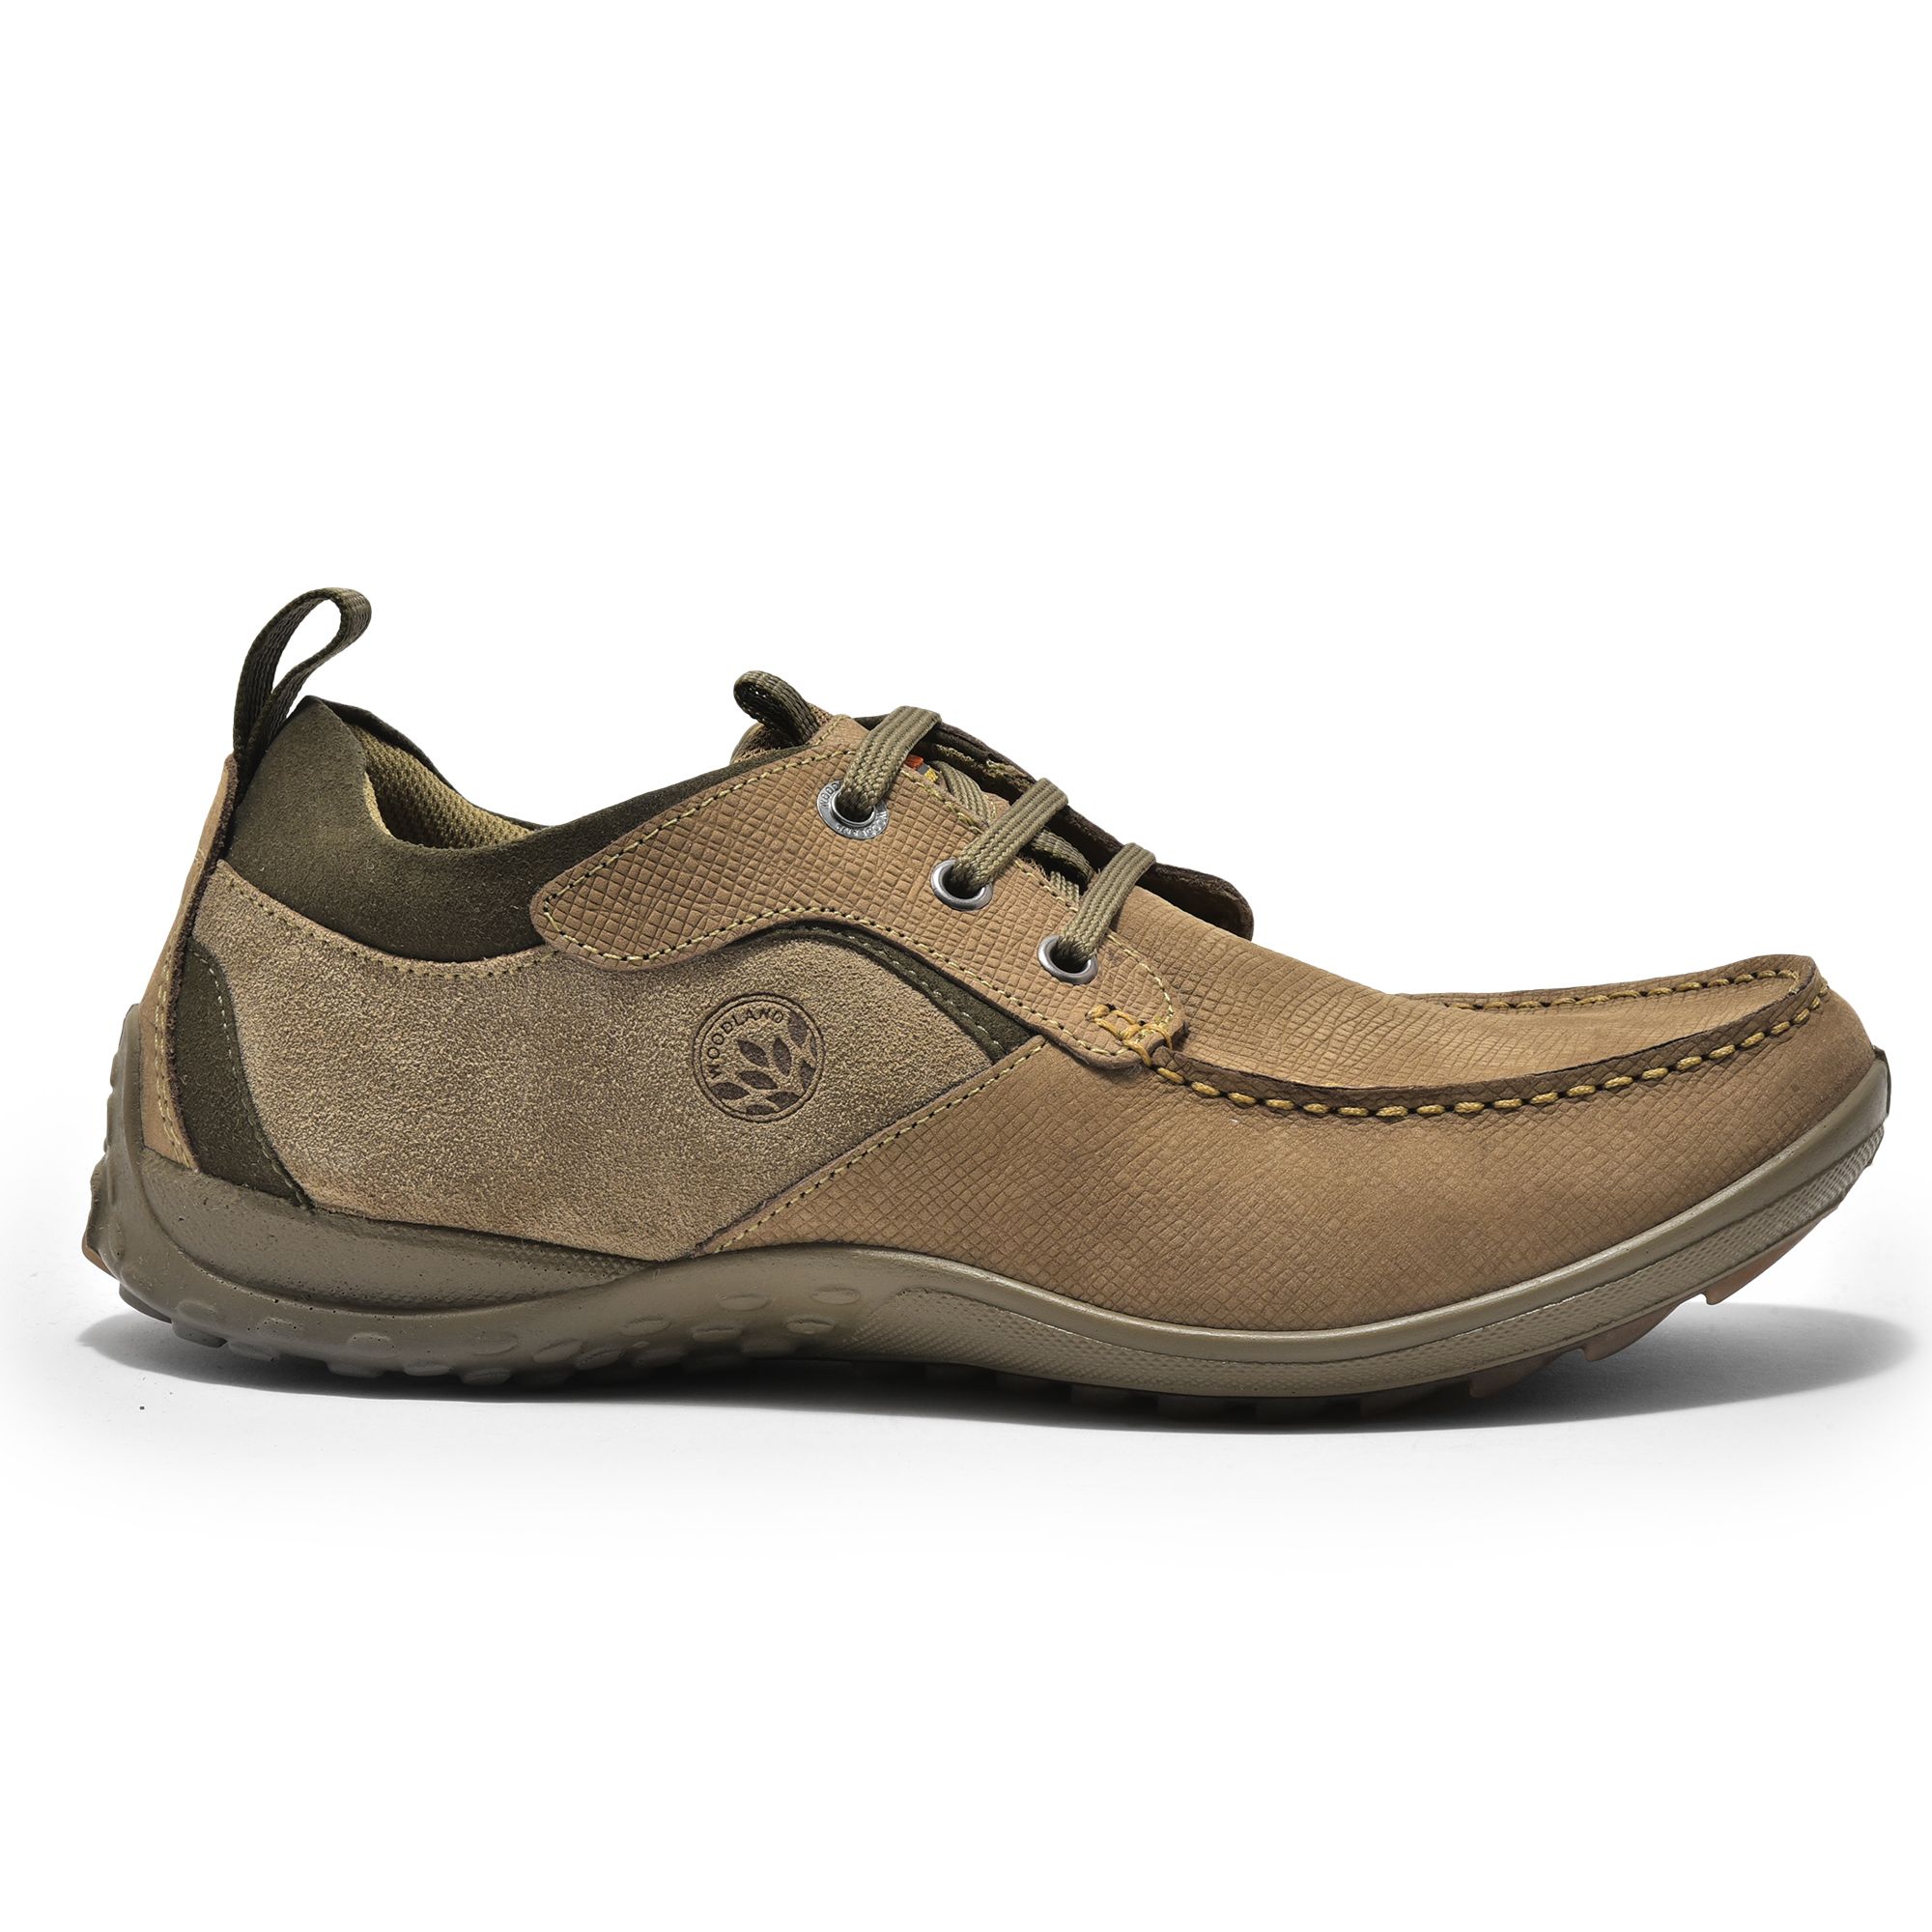 WOODLAND BROWN BASIC SANDAL in Chennai at best price by Safary Footwear And  Bags - Justdial